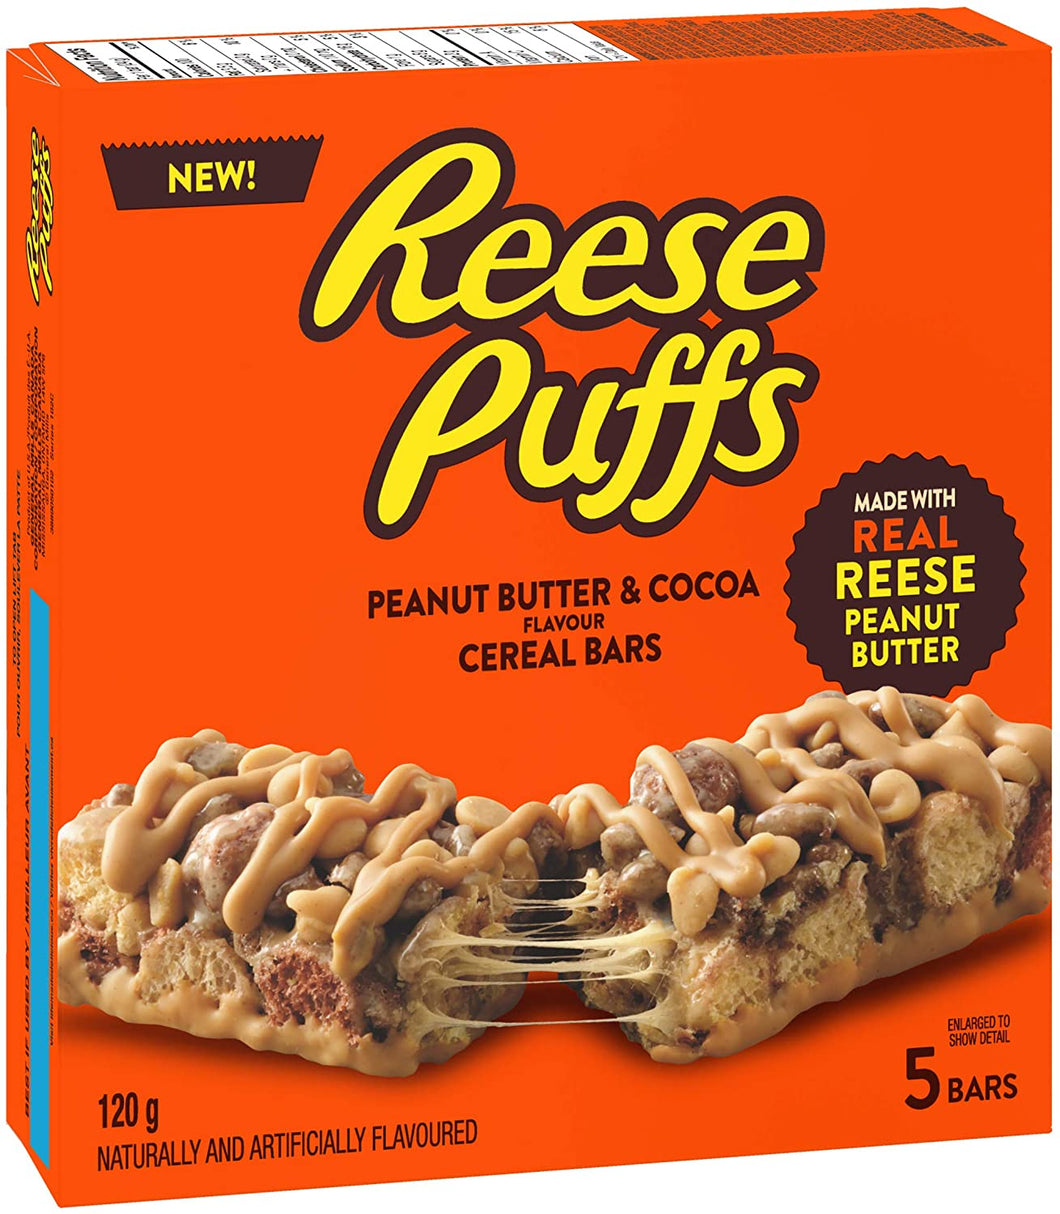 Reese Puffs Cereal Bars